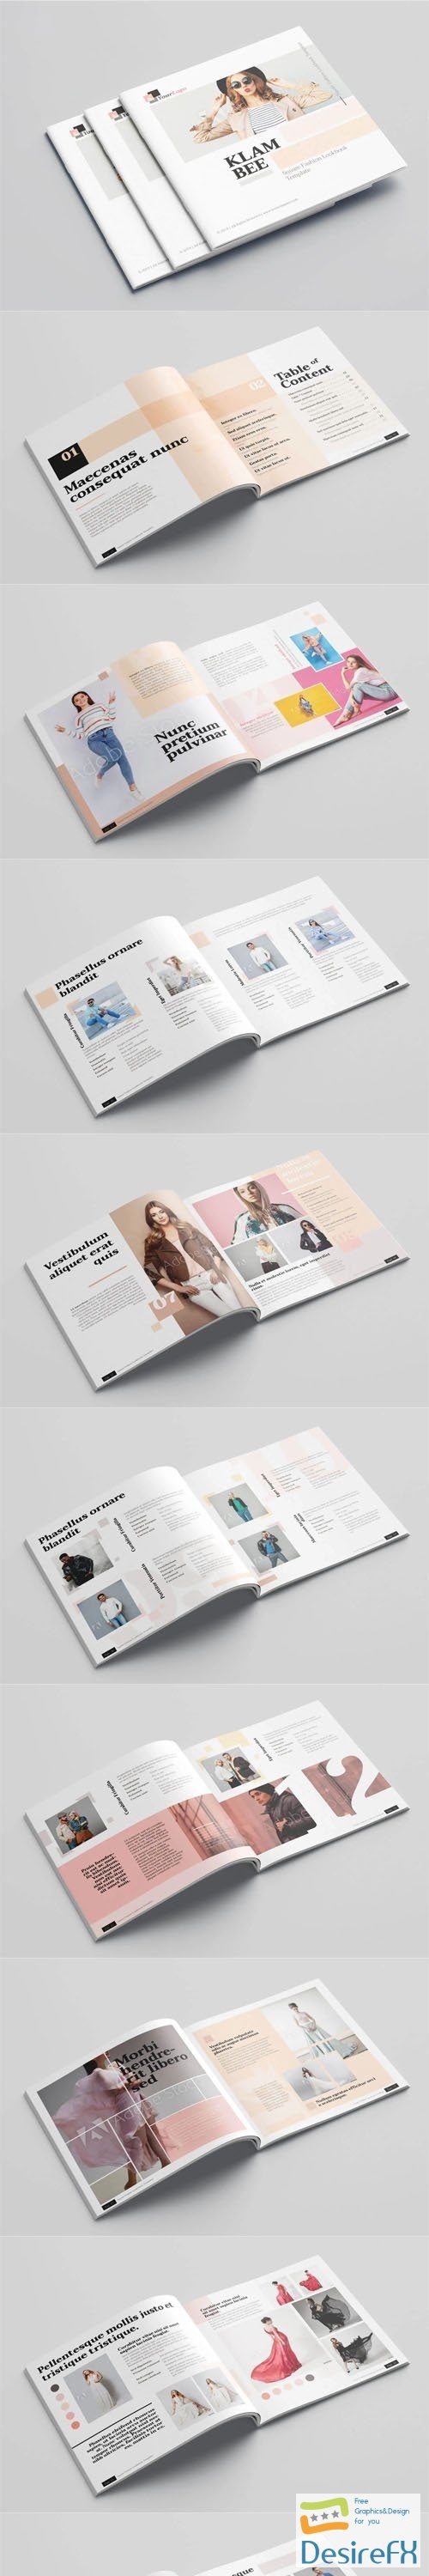 Square Fashion Lookbook INDD Template 24 Pages